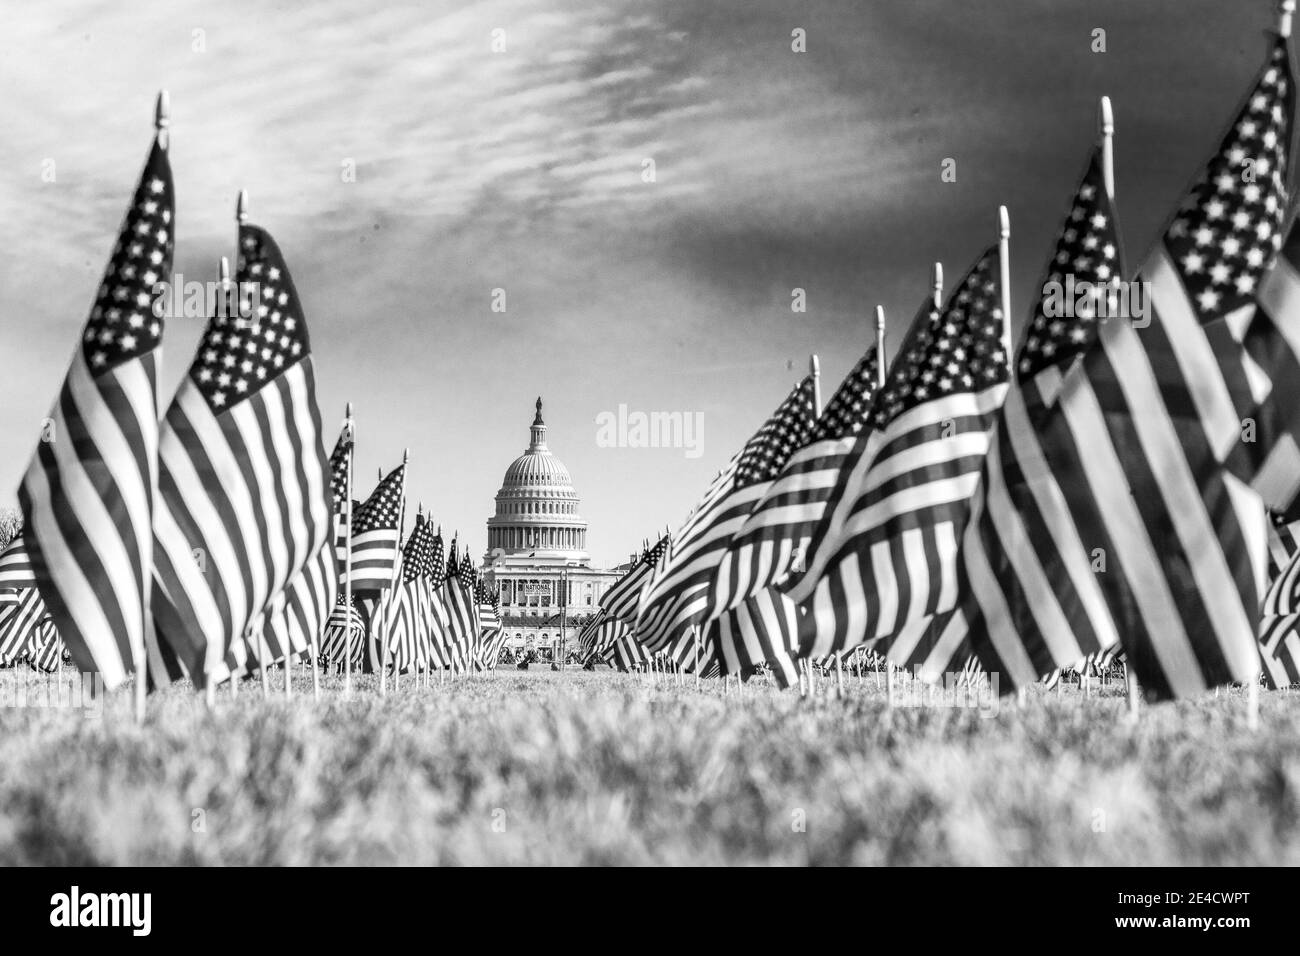 Washington, Dc, United States. 22nd Jan, 2021. WASHINGTON D.C., JANUARY 22- 'The Field of Flags' at the National Mall is disassembled flag by flag on January 22, 2021 in Washington, DC Nearly 200,000 flags were placed on the grass to represent Americans who died from Covid-19 and couldn't be in attendance for the ceremony. Photo: Chris Tuite/ImageSPACE Credit: Imagespace/Alamy Live News Stock Photo